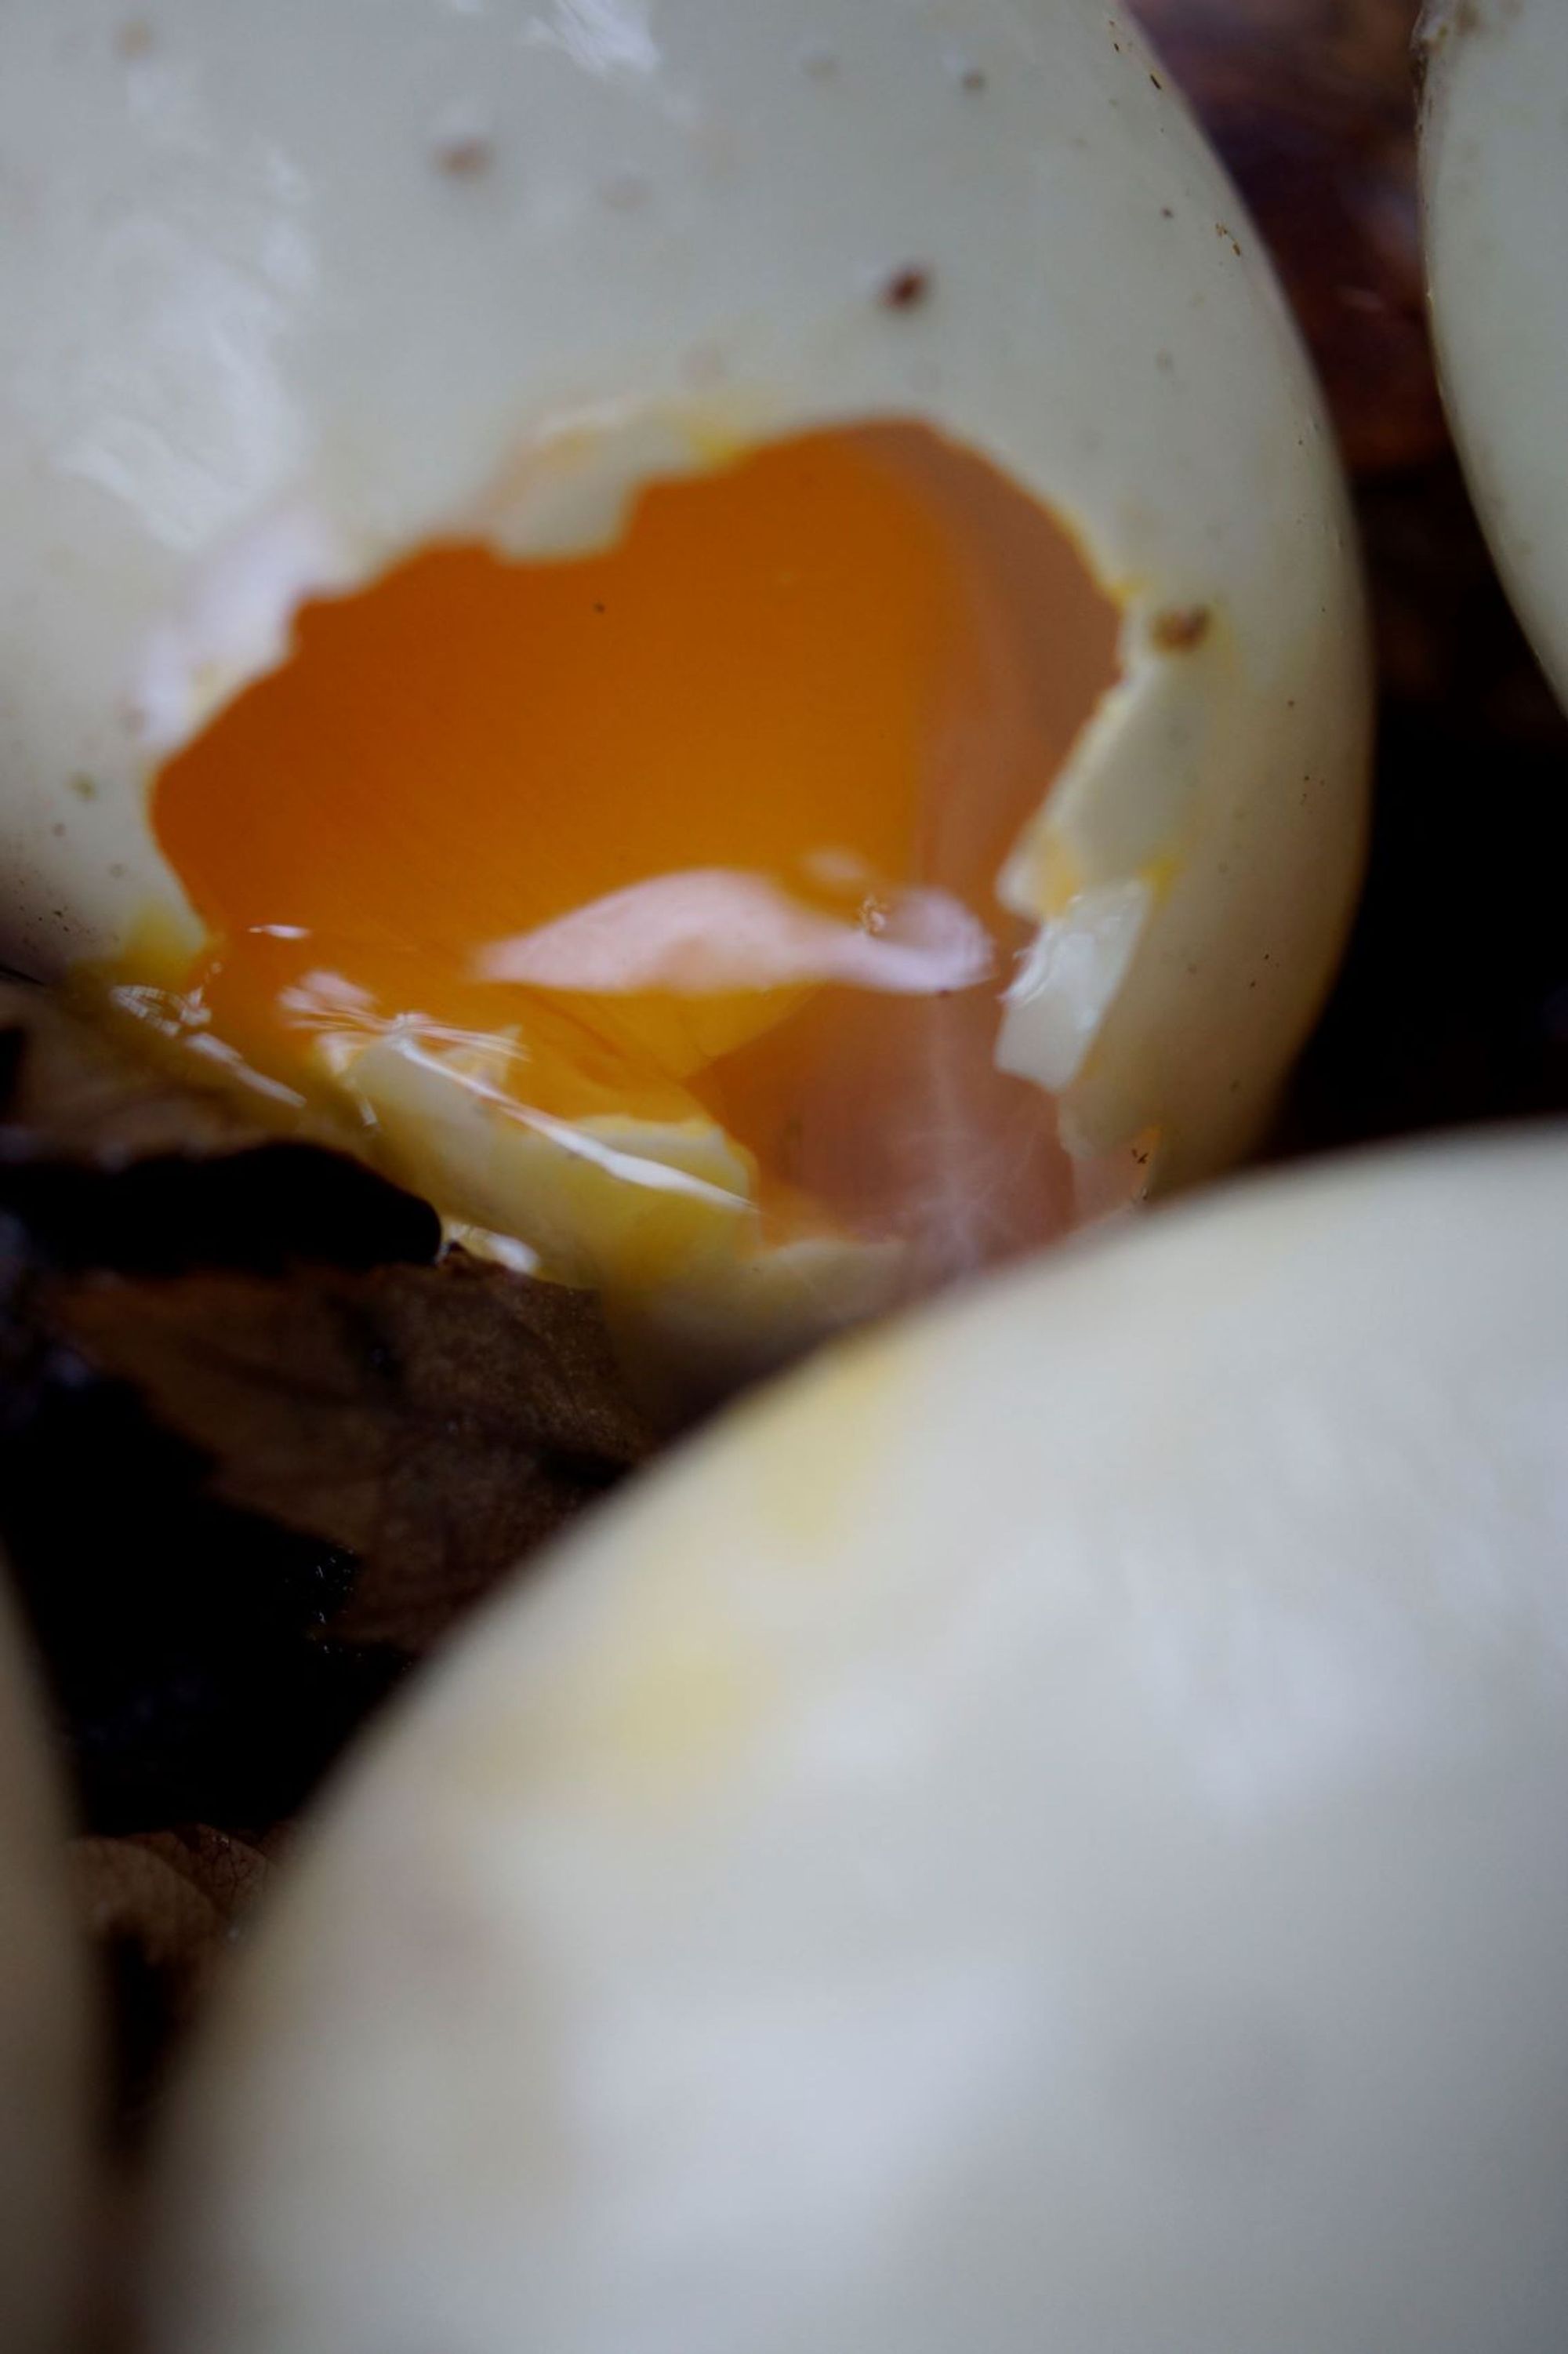 A cracked duck egg showing yolk